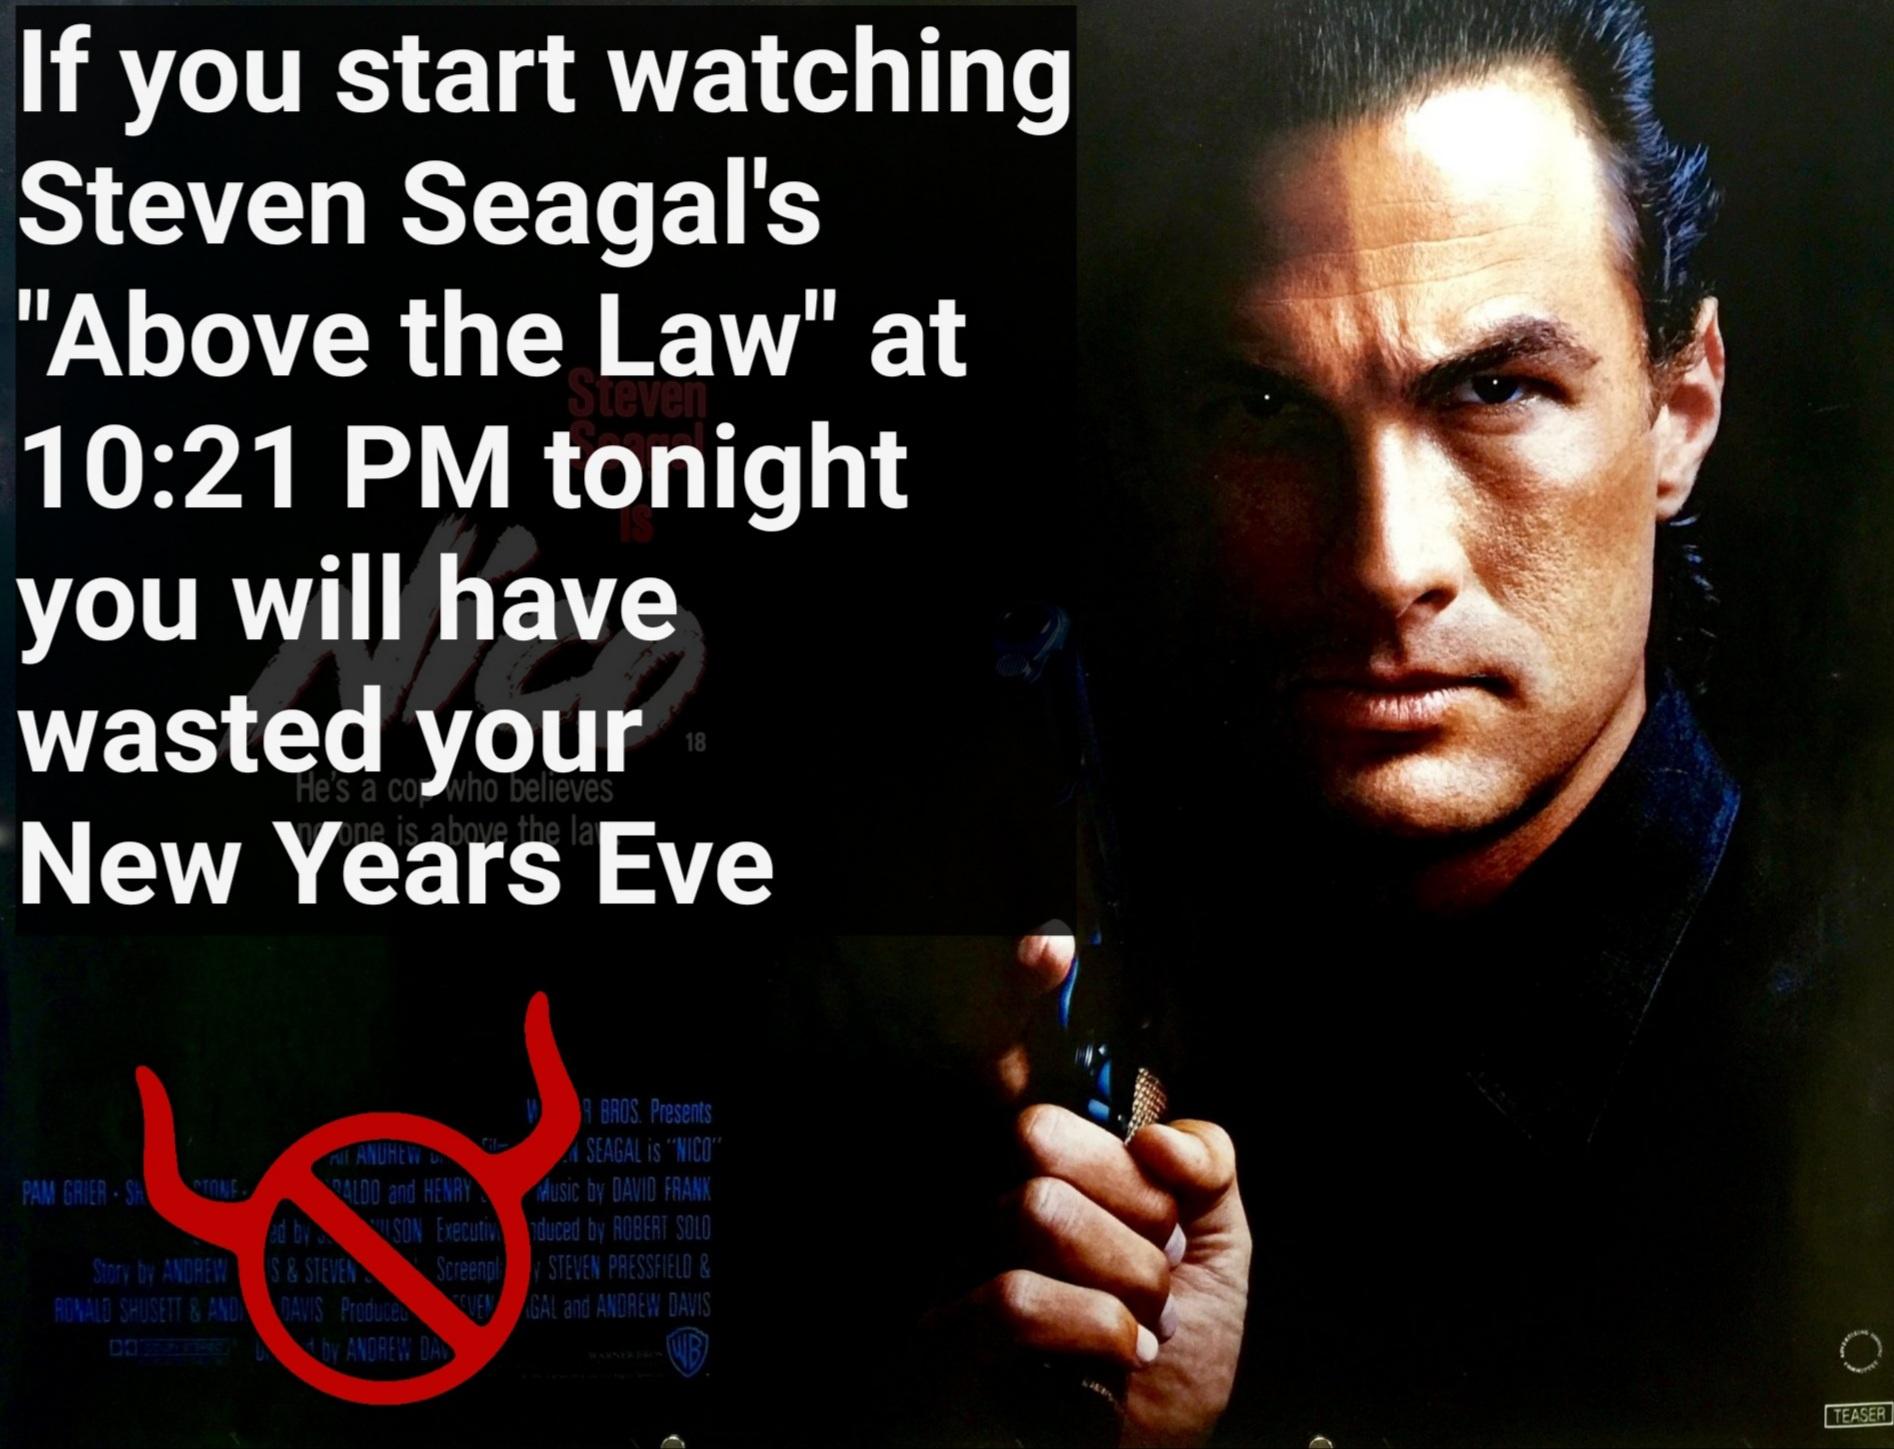 film - Steven If you start watching Steven Seagal's "Above the Law" at tonight you will have wasted your New Years Eve 18 Tous Bros. Presents At Anuheid Seagal Is "Nico" Pam Crier Sa Valdo and Henry Music by David Frank ed by Uson Executinduced by Robert 